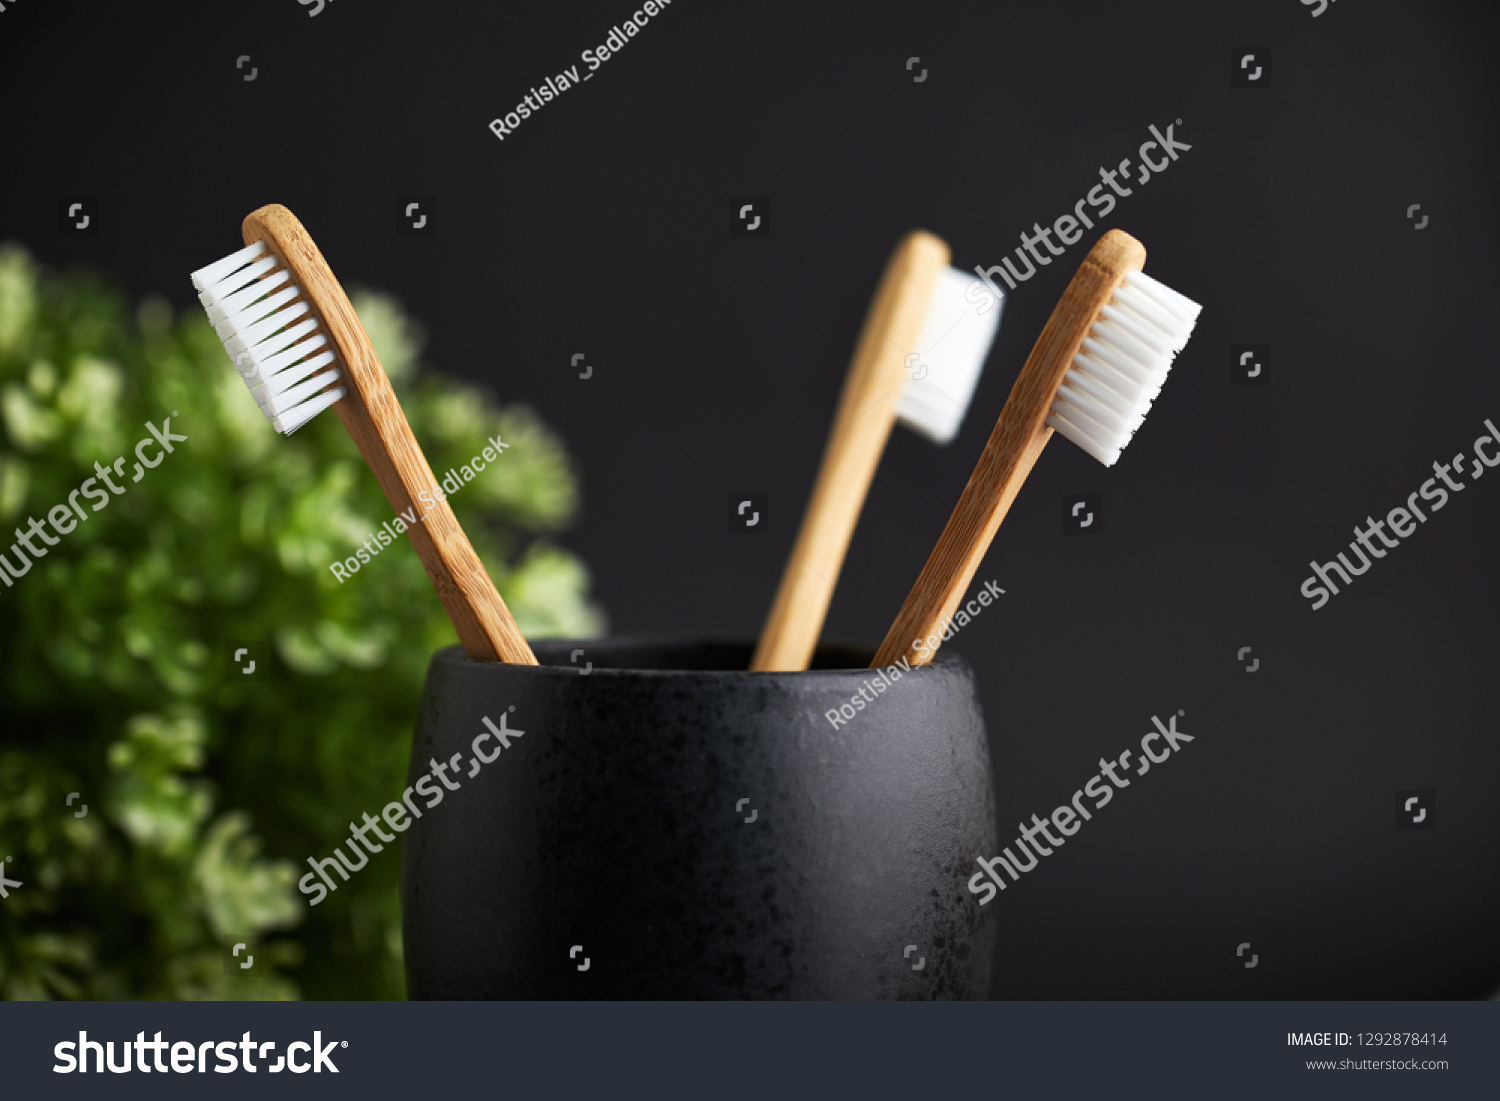 Close up of three bamboo toothbrushes in a black glass with plant on a dark background #1292878414